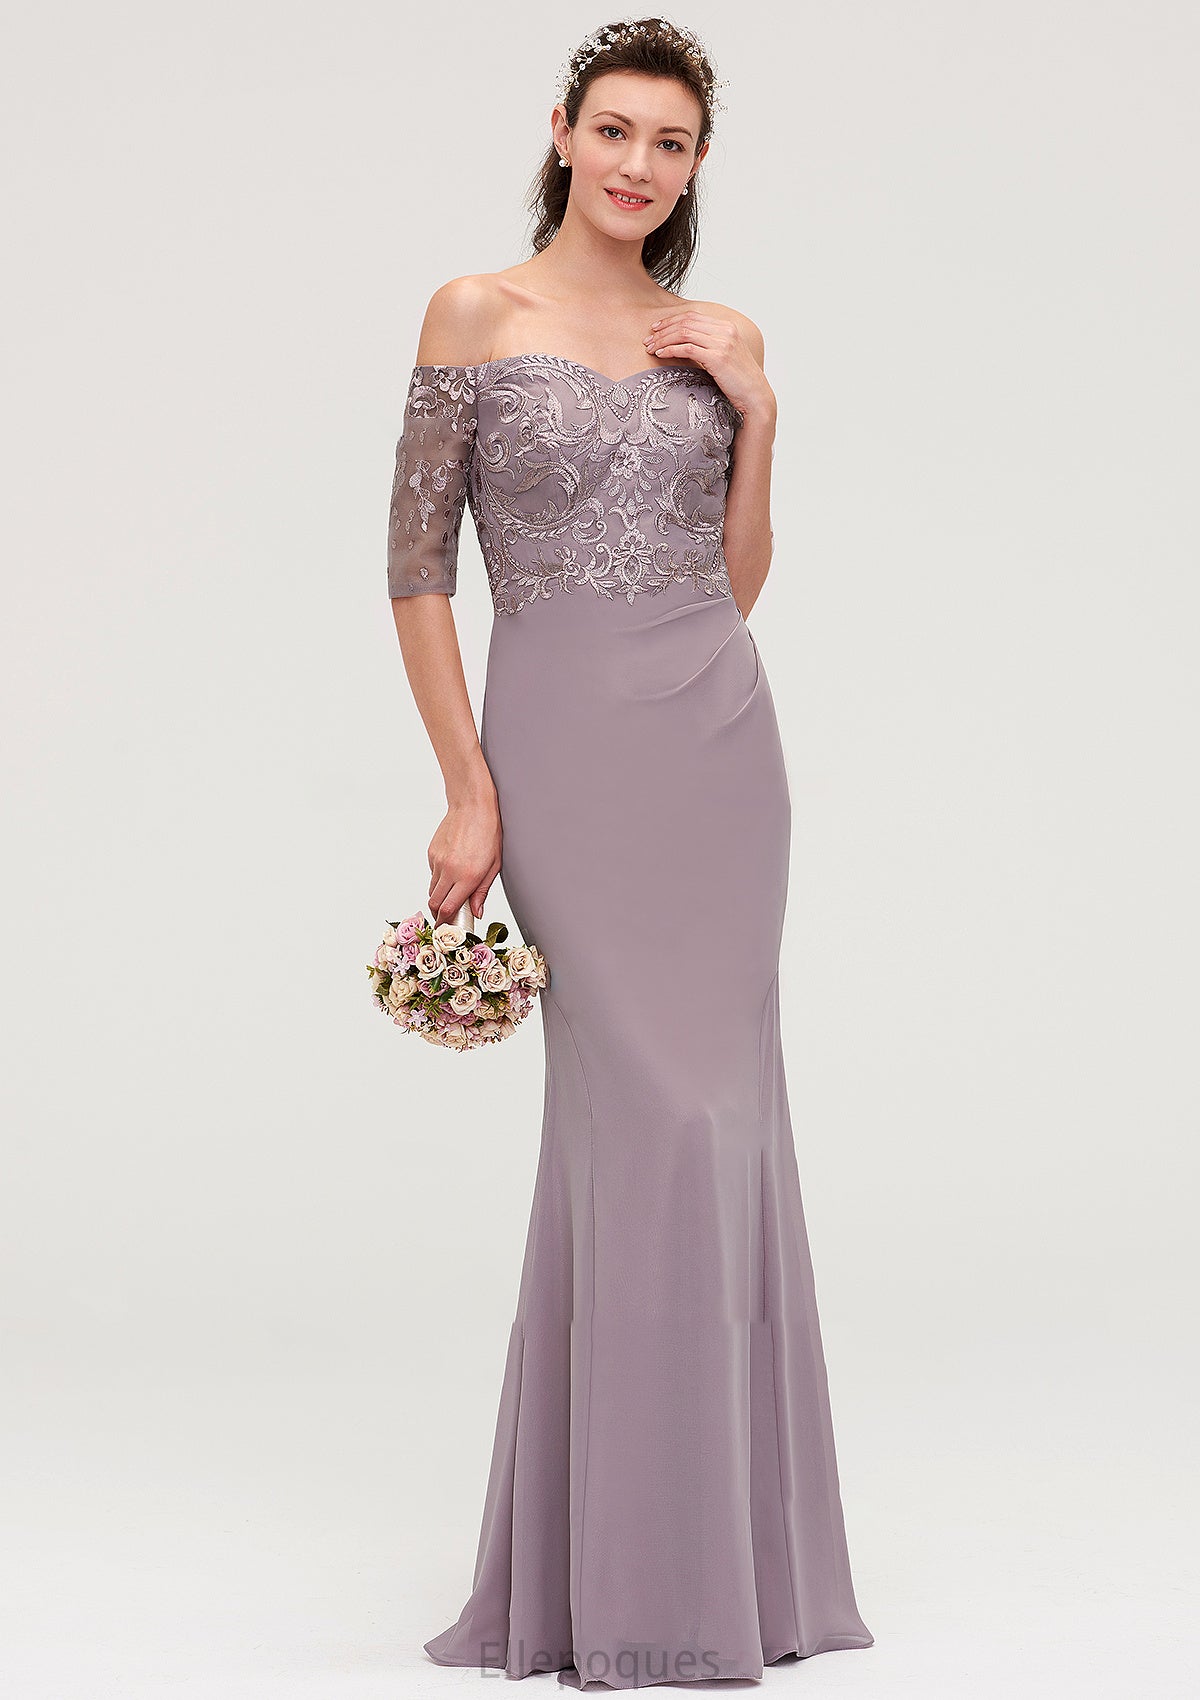 Off-the-Shoulder Half Sleeve Sheath/Column Long/Floor-Length Chiffon Bridesmaid Dresseses With Appliqued Coral HOP0025458